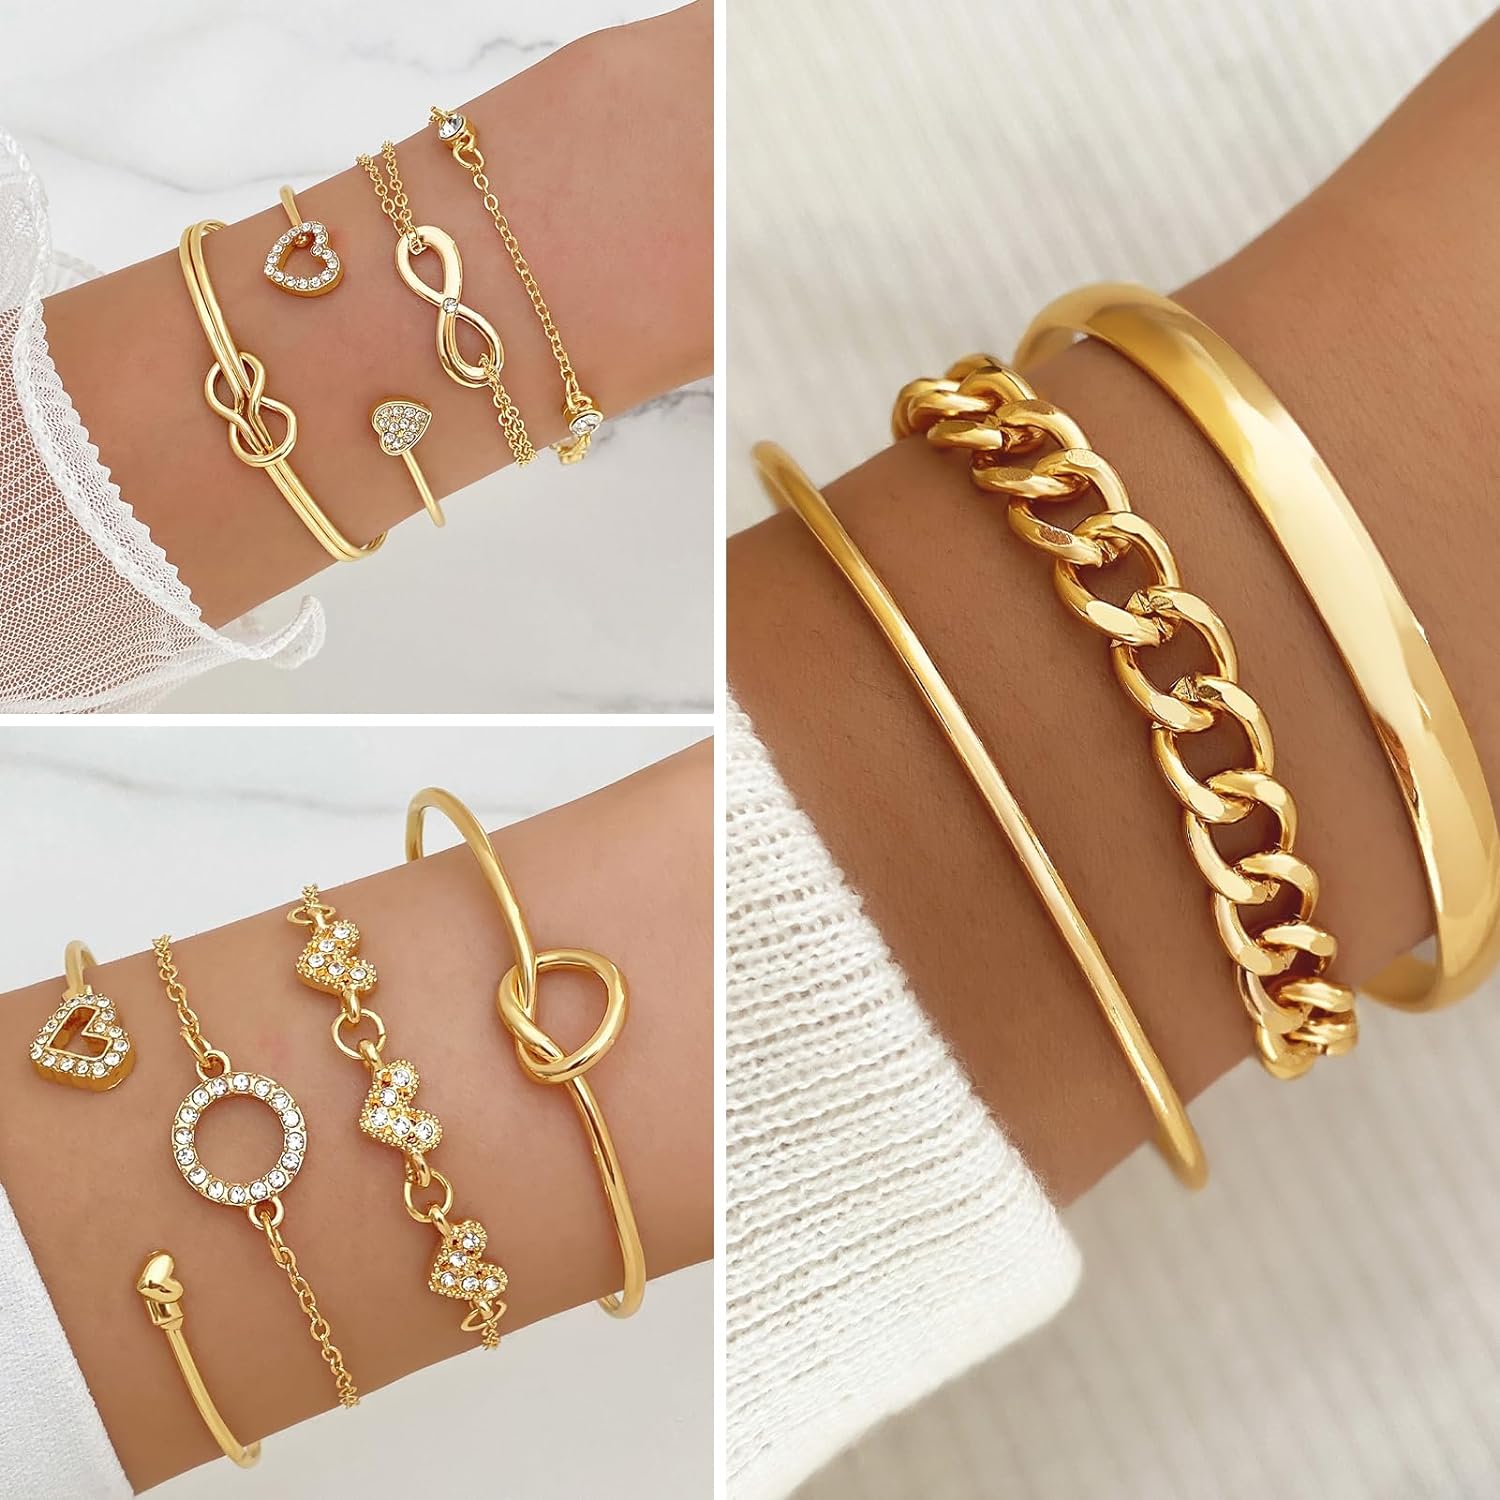 VKME 45 PCS Gold Jewelry Set for Women Girls Dainty Dangle Earrings,Elegant Knuckle Rings,Adjustable Bracelets and Necklaces,Perfect Fashion Anniversary Birthday Party Gift,Trendy Jewelry Pack